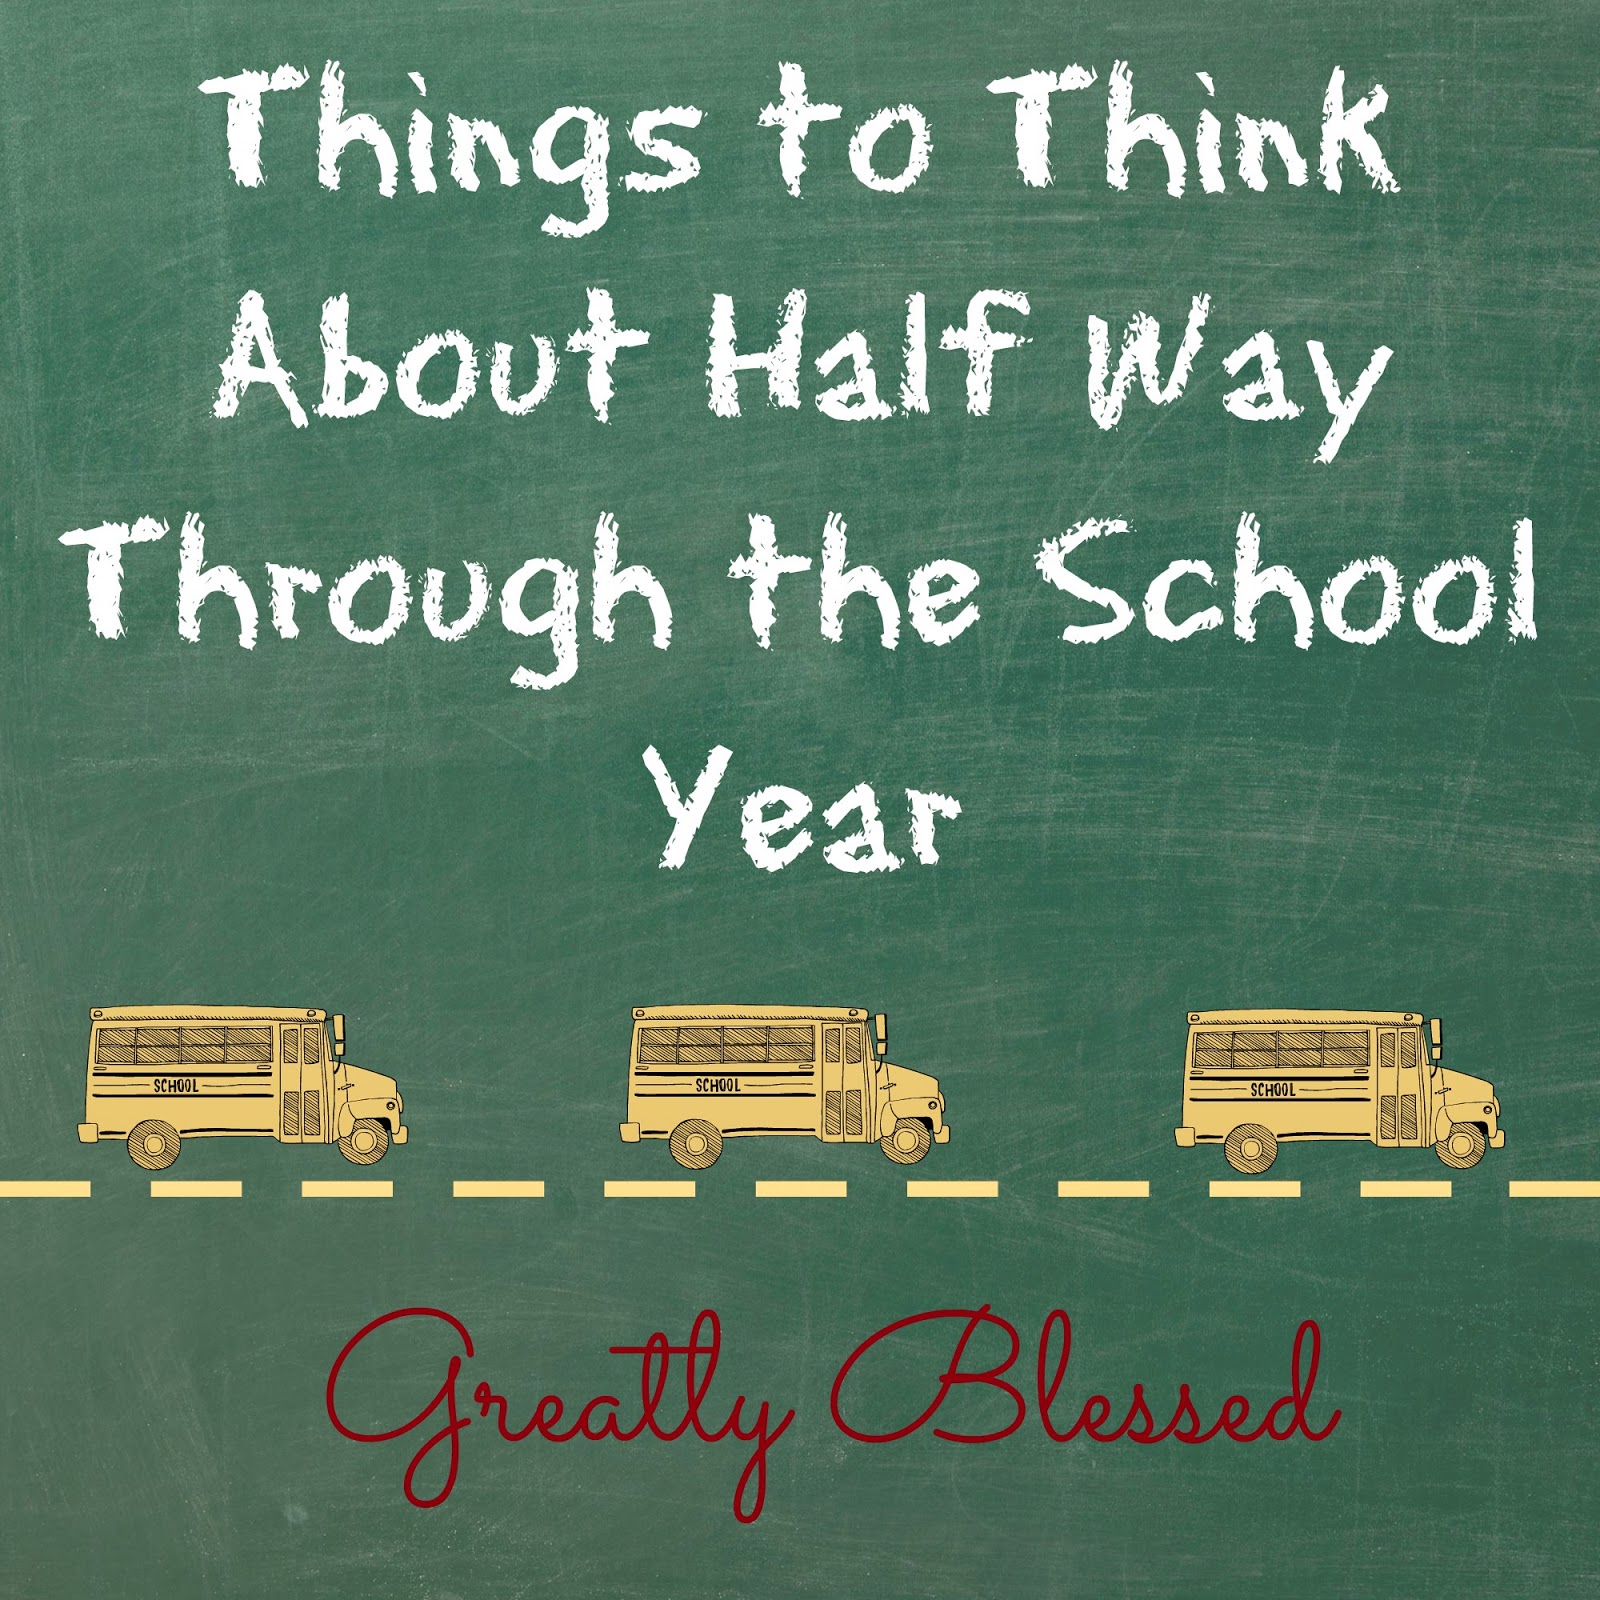 Greatly Blessed: Things to Think About Half Way Through the School Year